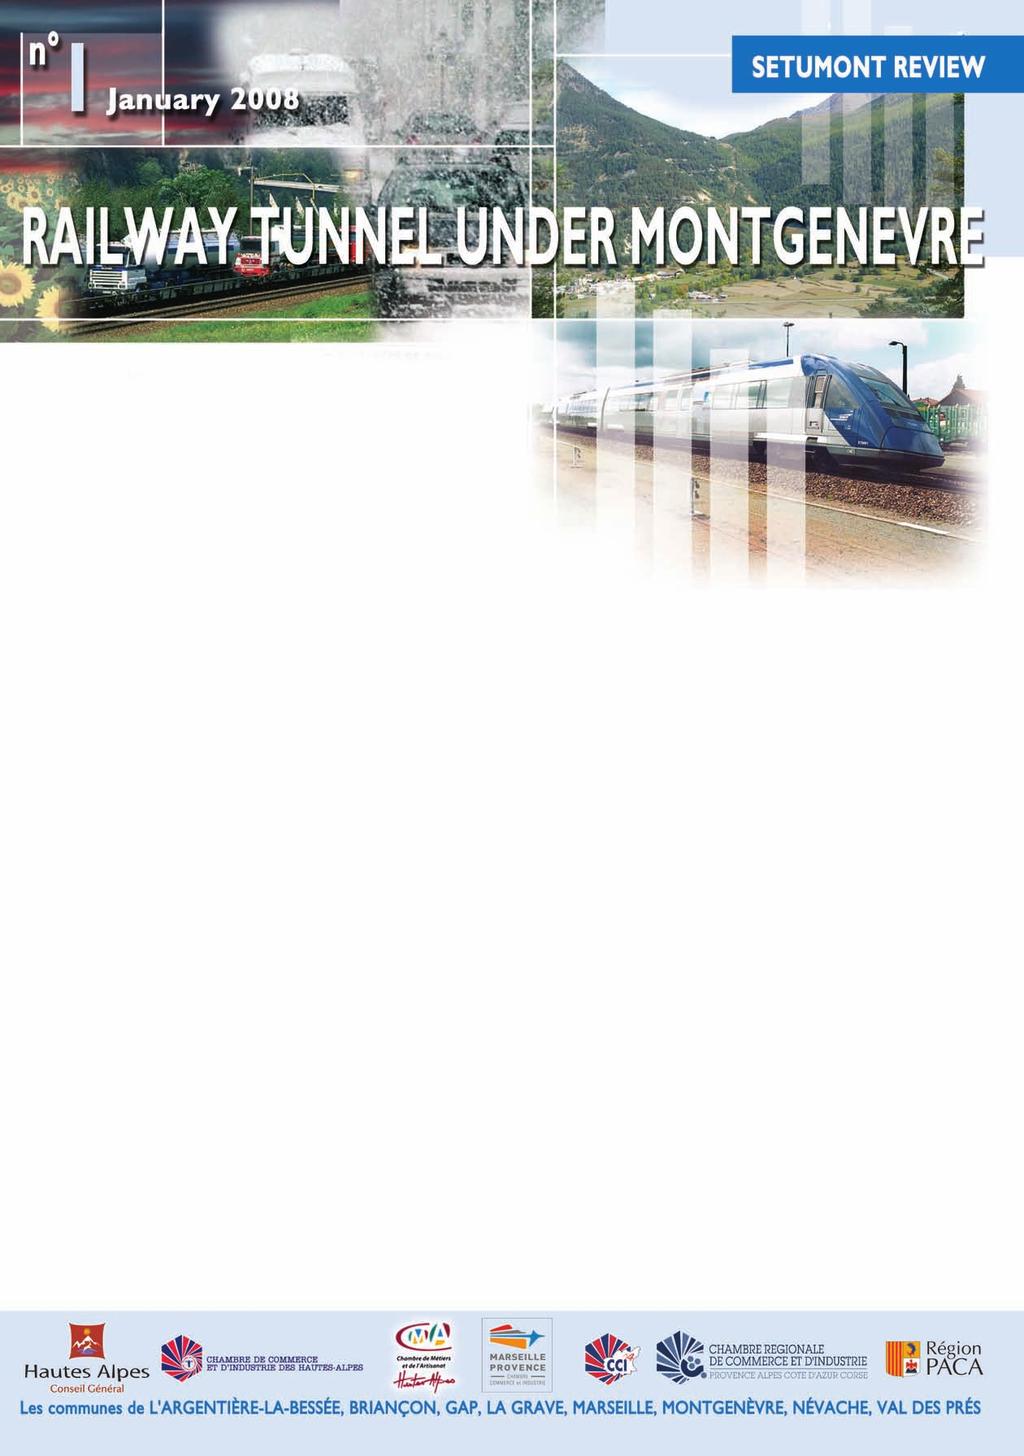 EDITORIAL A tunnel under Montgenevre - an obvious solution.